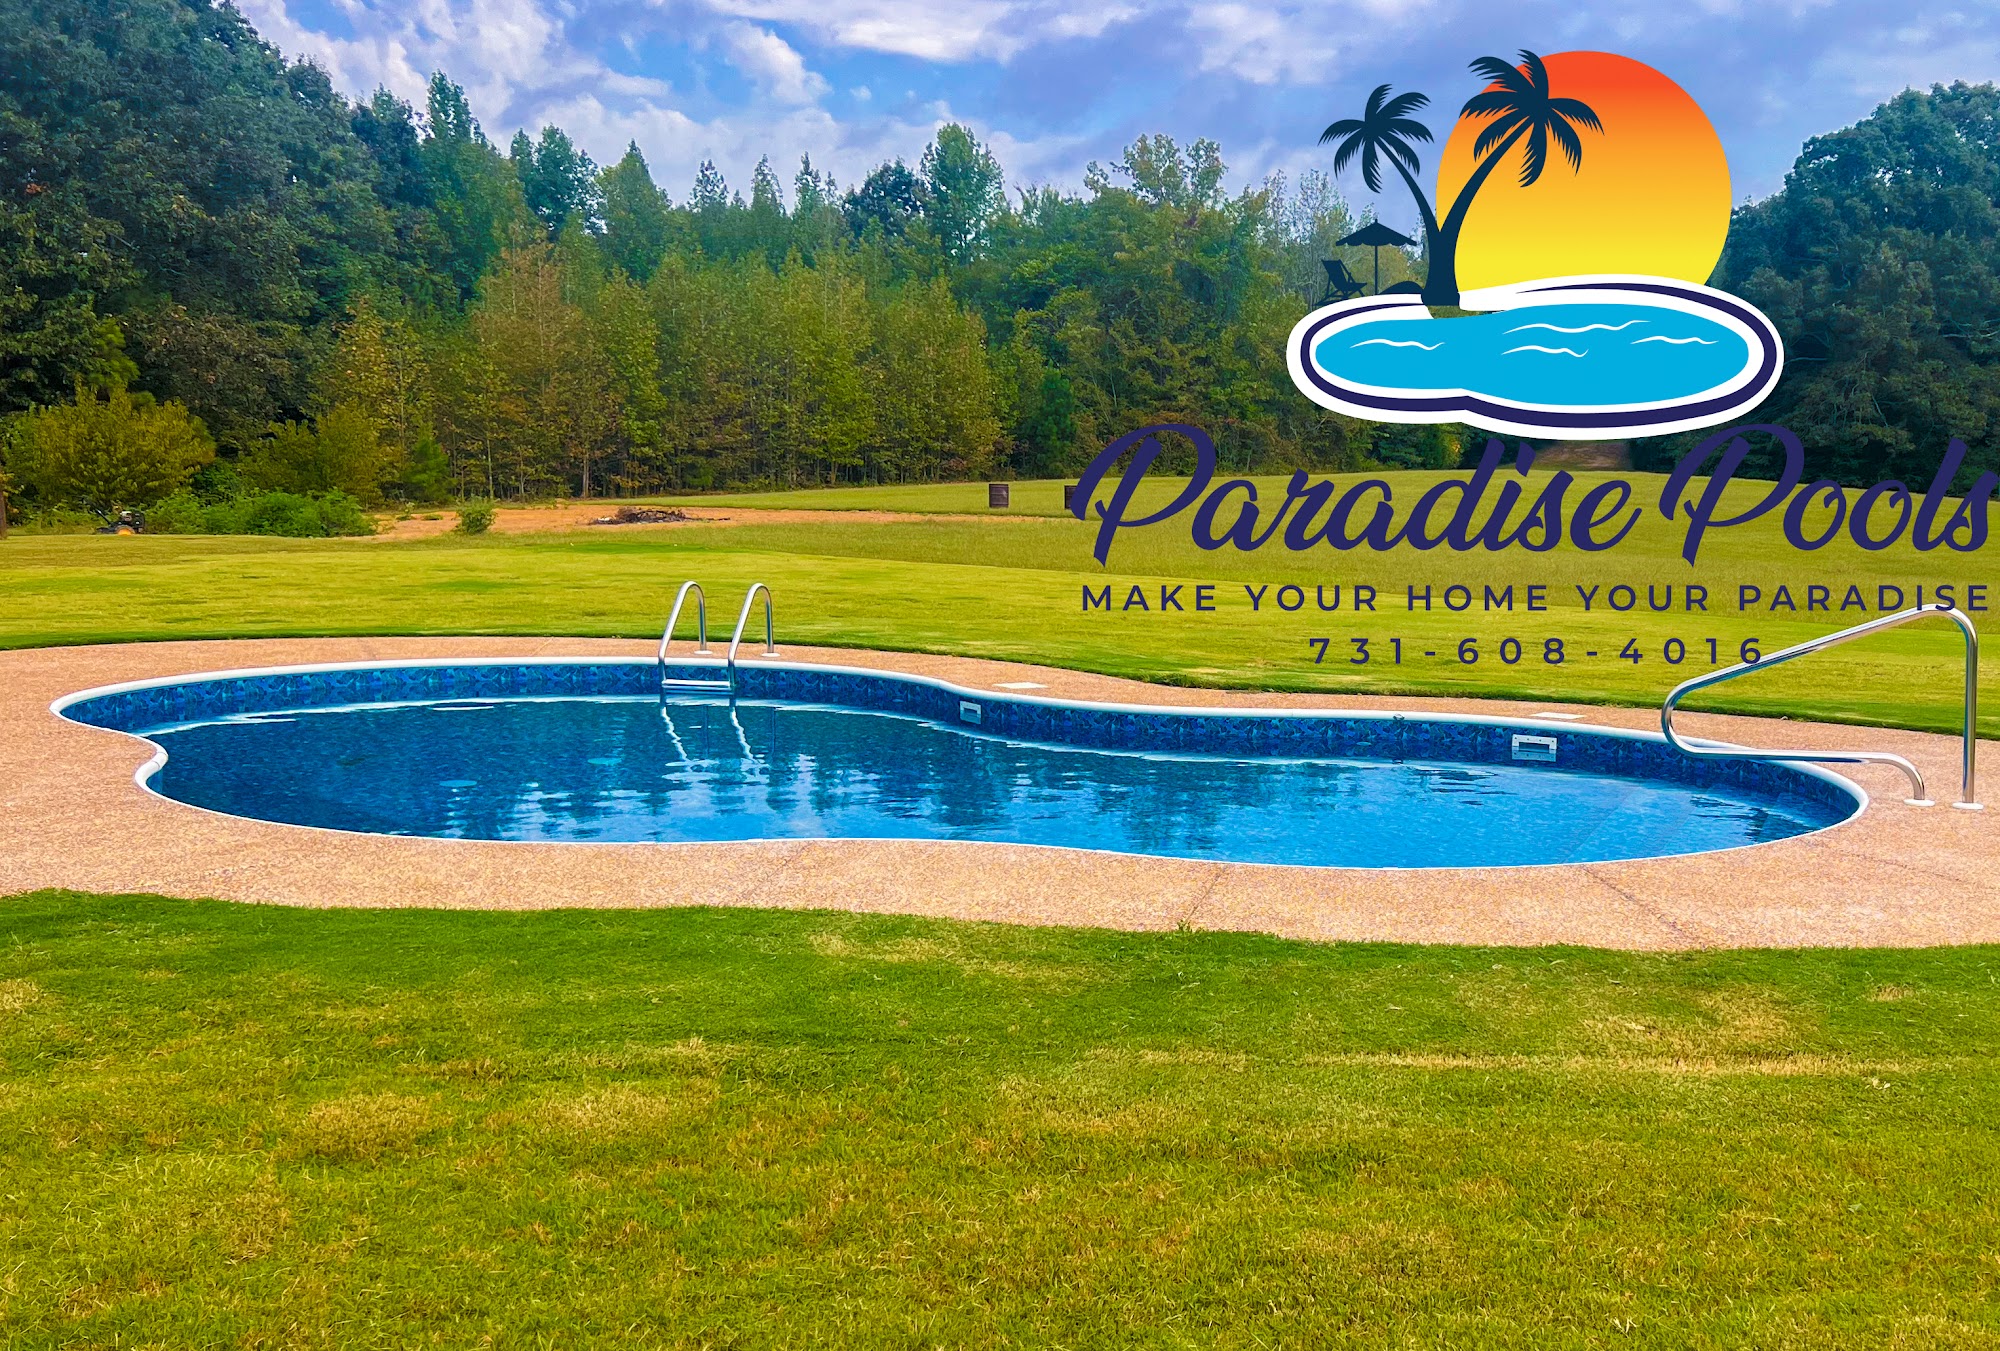 Paradise Pools & Spas 860 Hubberd Town Rd, Beech Bluff Tennessee 38313